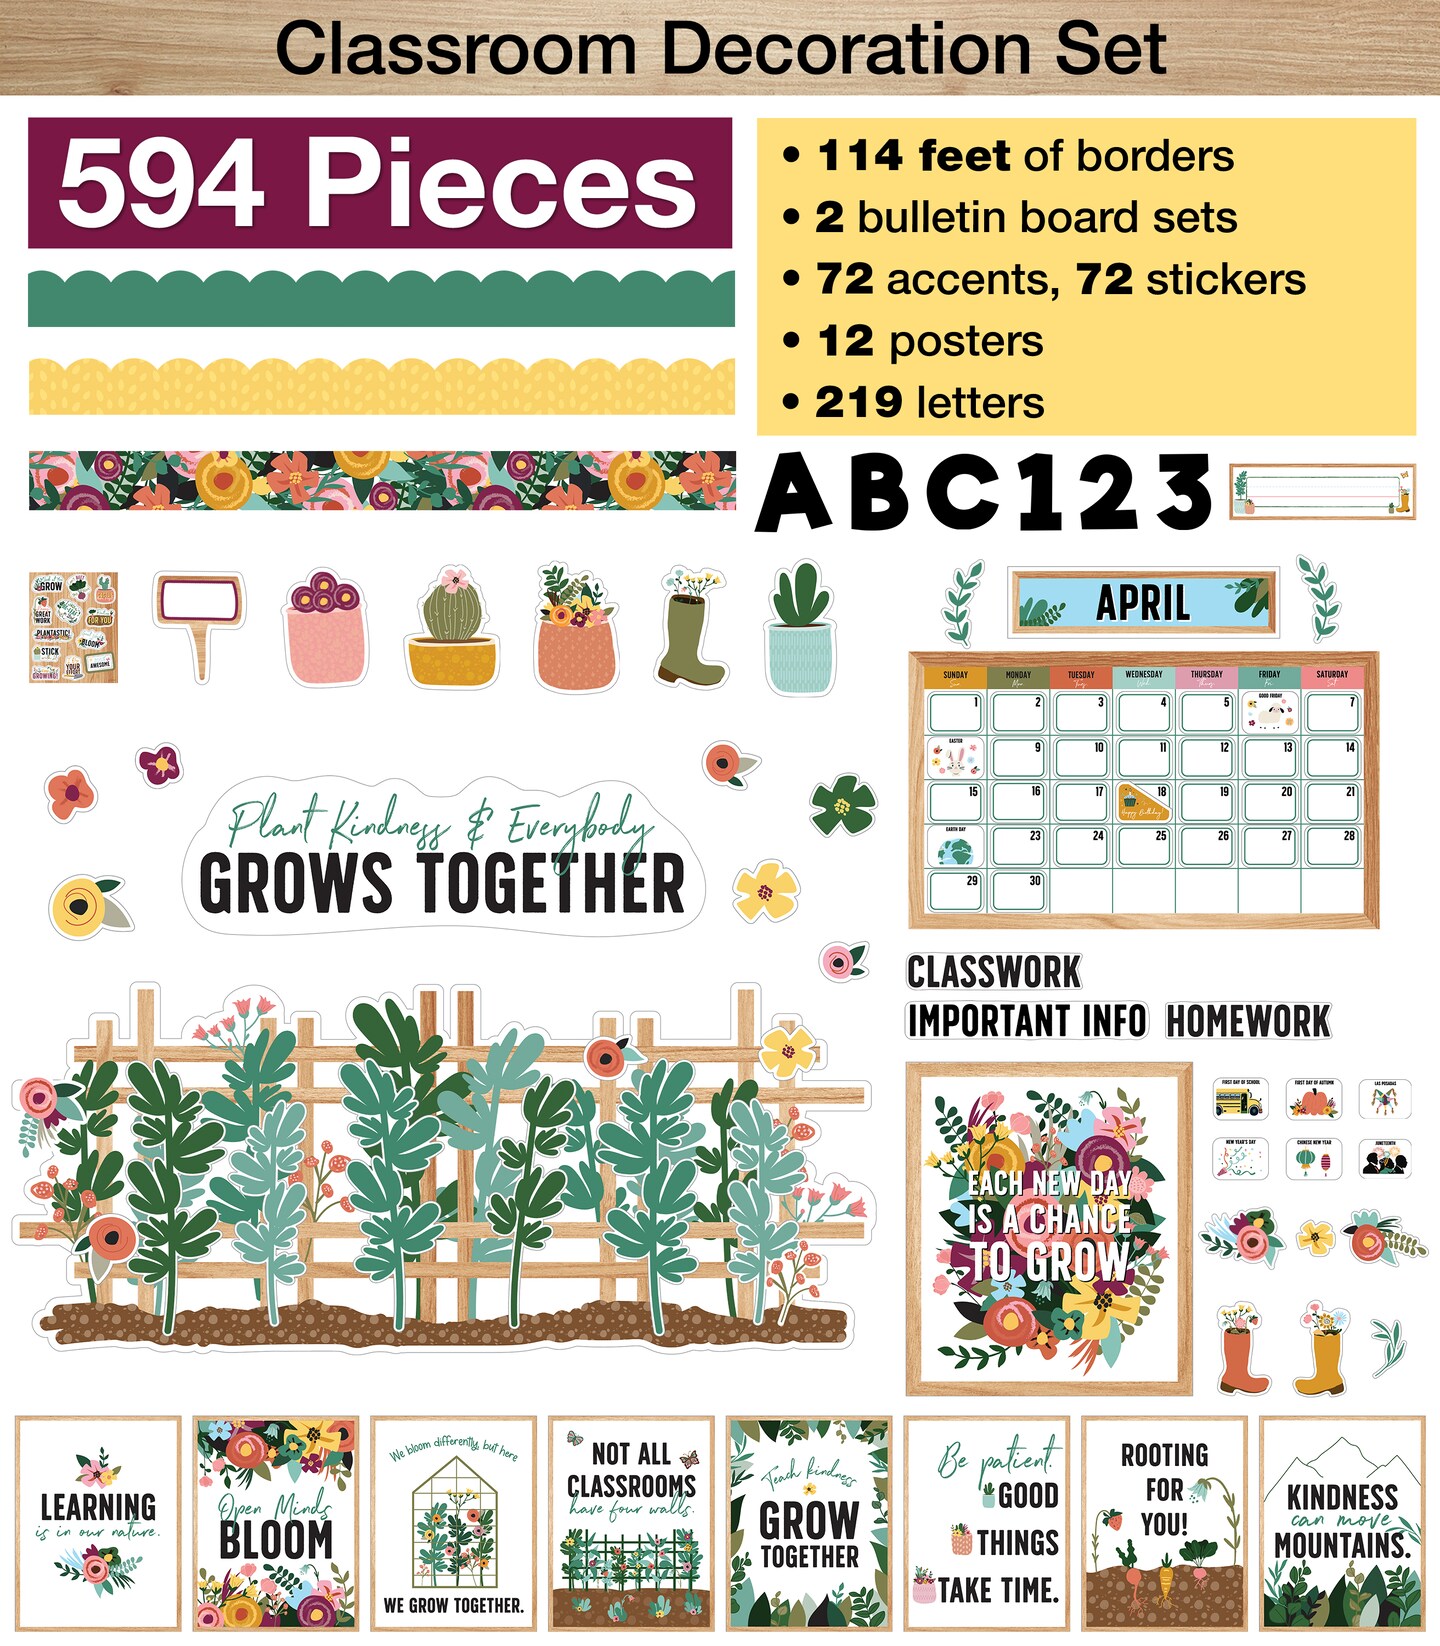 Carson Dellosa 594 Pc. Grow Together Classroom Decor Bundle, Bulletin Board Borders, Monthly Calendar, Bulletin Board Letters, Classroom Cutouts, Stickers, Bulletin Board, Posters, and Nameplates